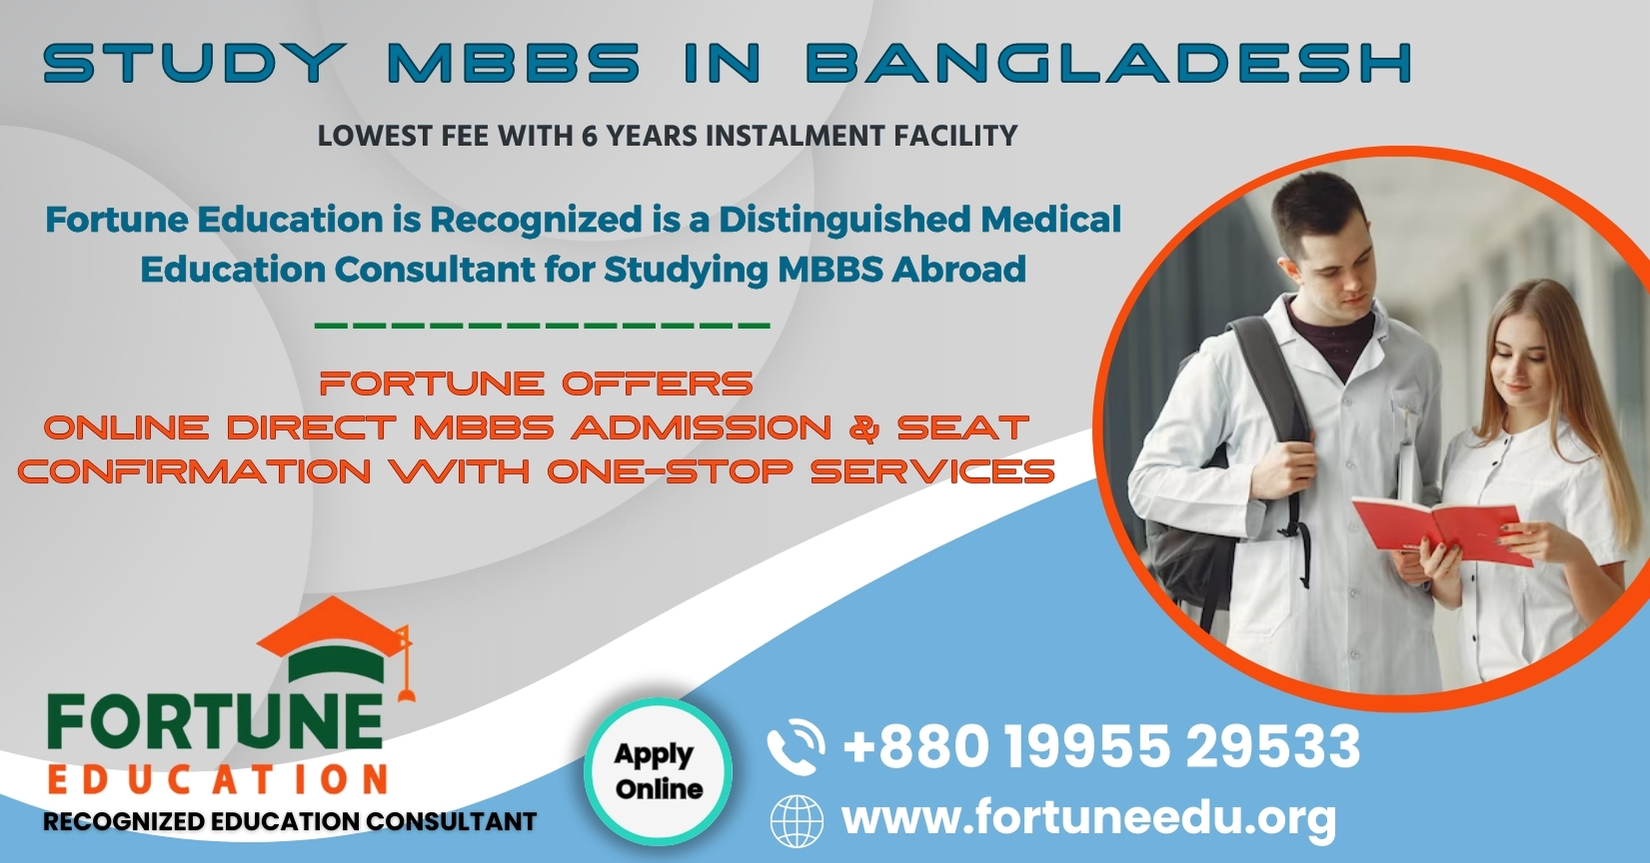 Study MBBS in India 2024-25: Study MBBS in India 2024, Study MBBS in India, MBBS Admission, Eligibility, MBBS Fees in India, MBBS in India 2024-25, Fees , Eligibility, MBBS Admission 2024, MBBS in Bangladesh at Army Medical Colleges, Fortune Education